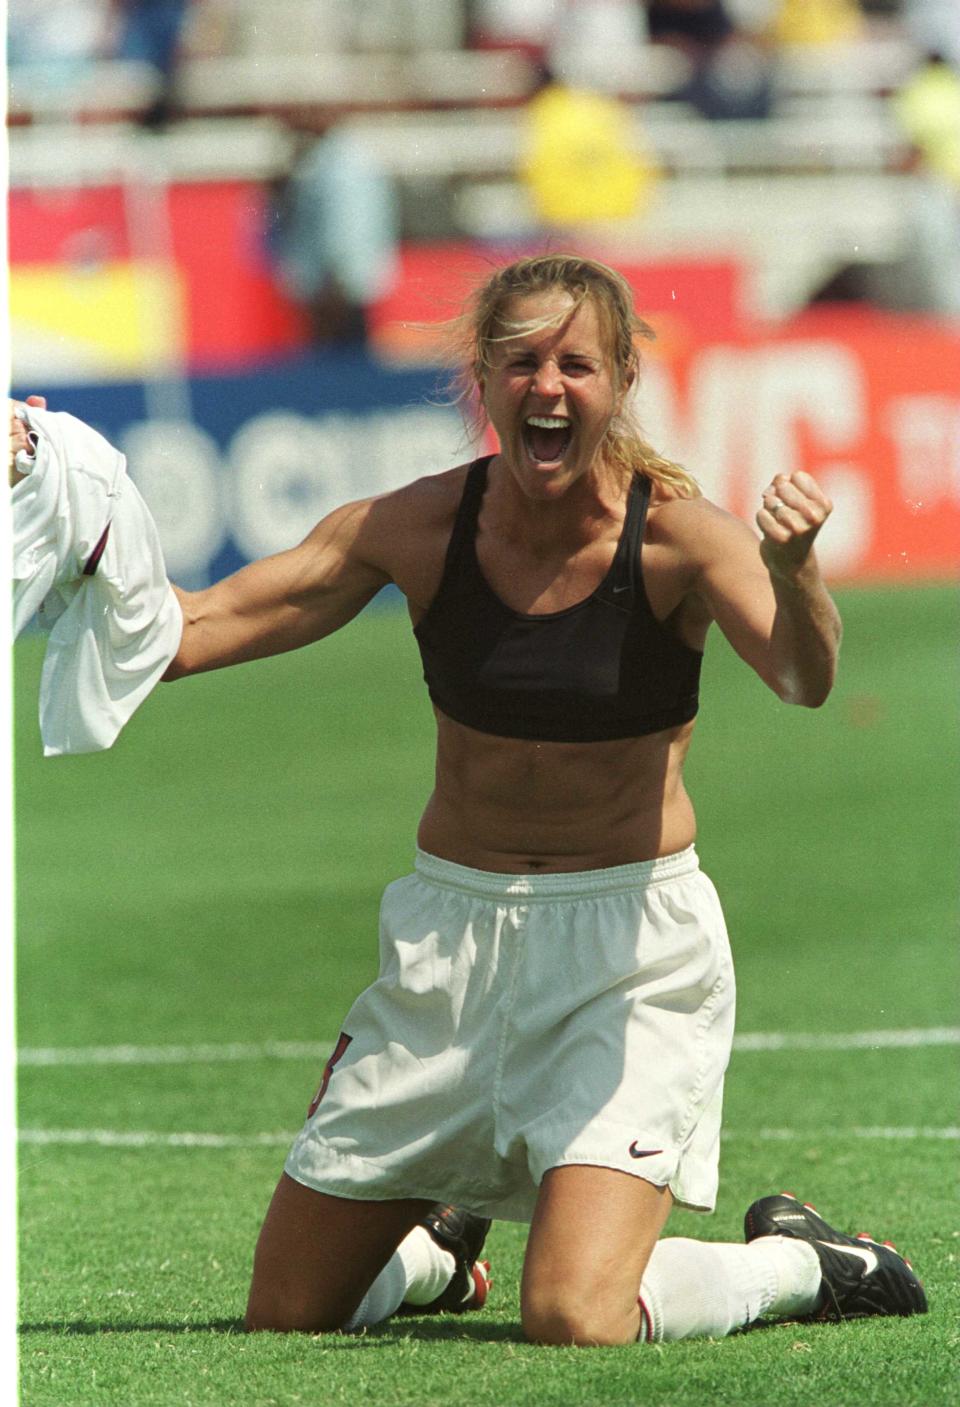 USA’s Brandi Chastain rips off her shirt in celebration at the end of the 1999 World Cup final. (Photo by Jon Buckle/EMPICS via Getty Images)